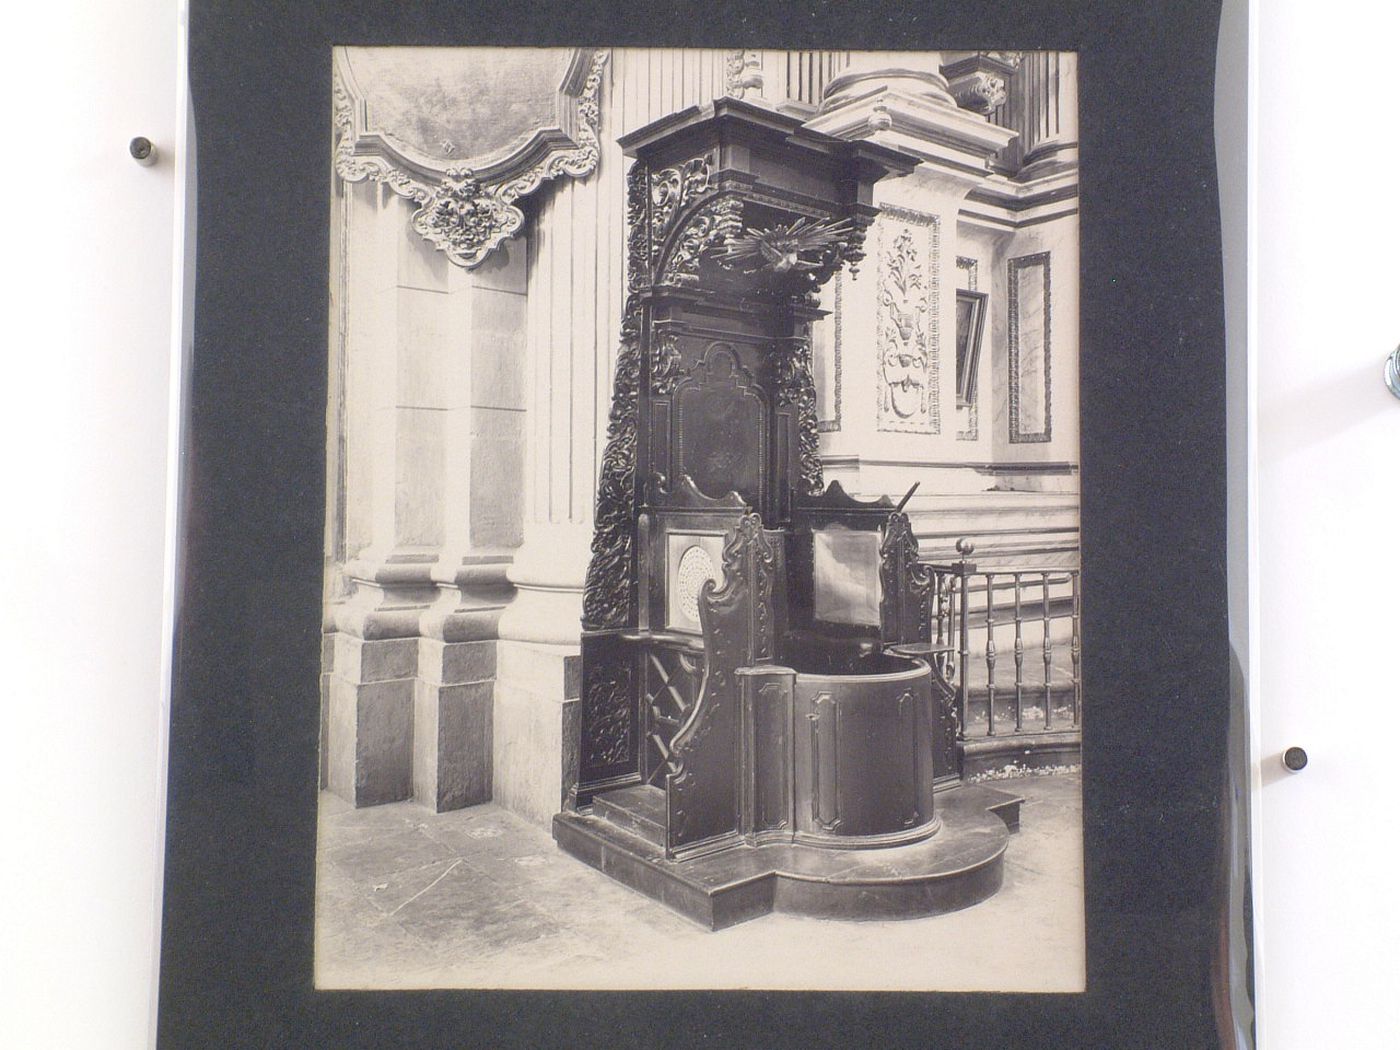 View of a confessional in the Catedral de Puebla, Mexico